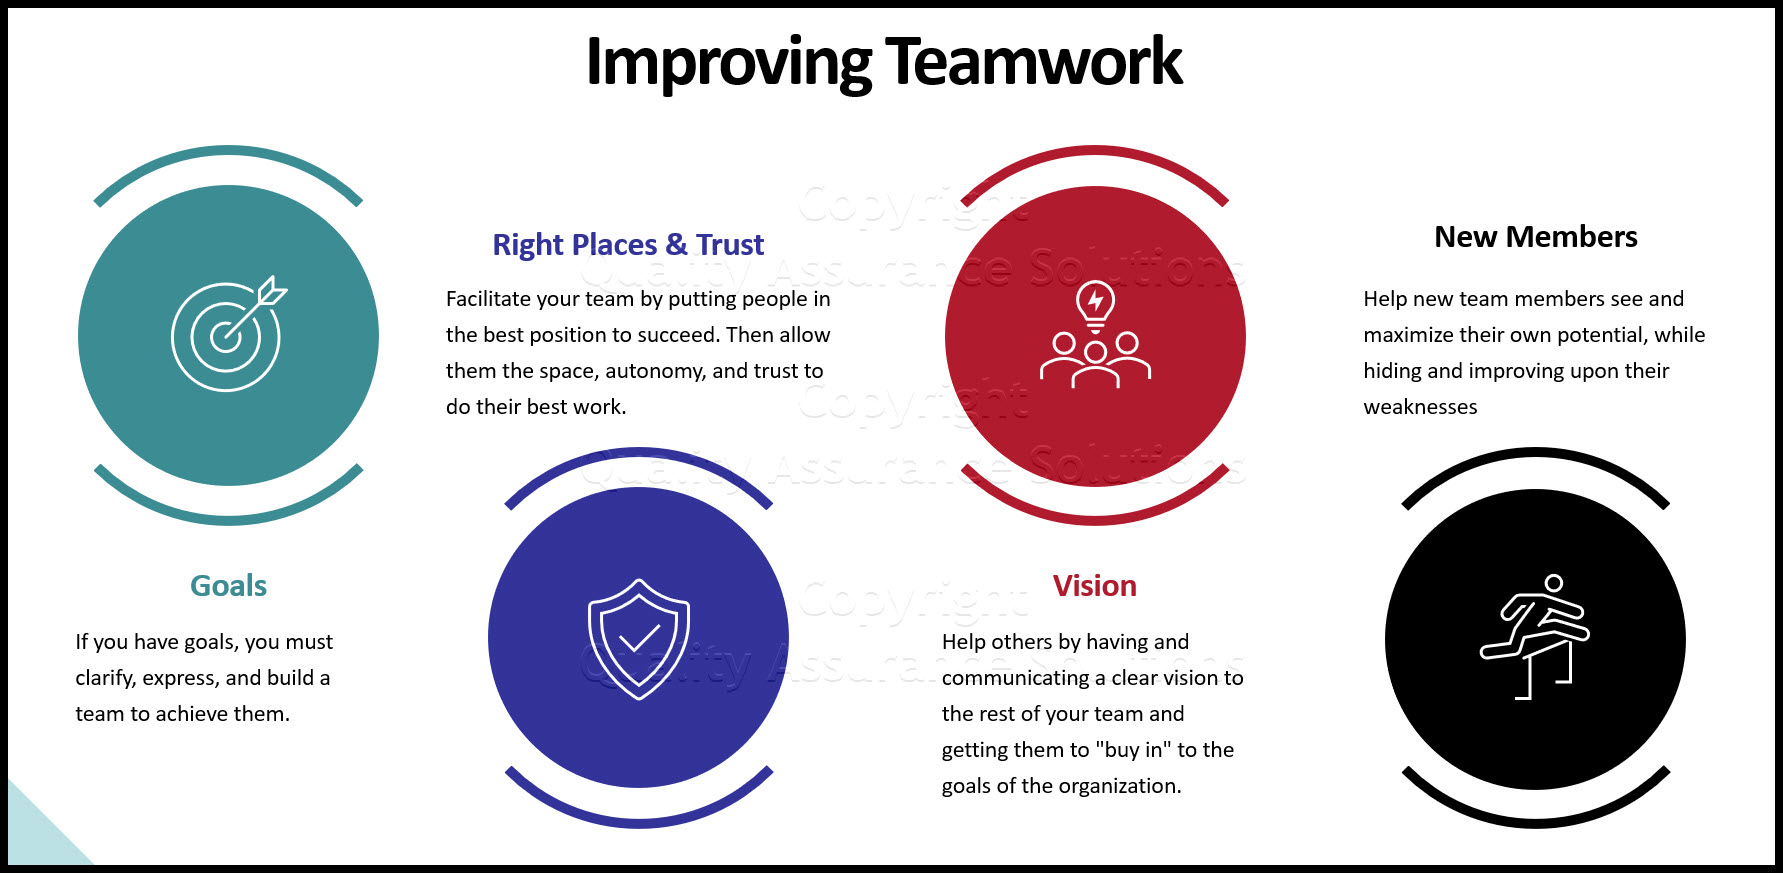 What are the quality of team work?